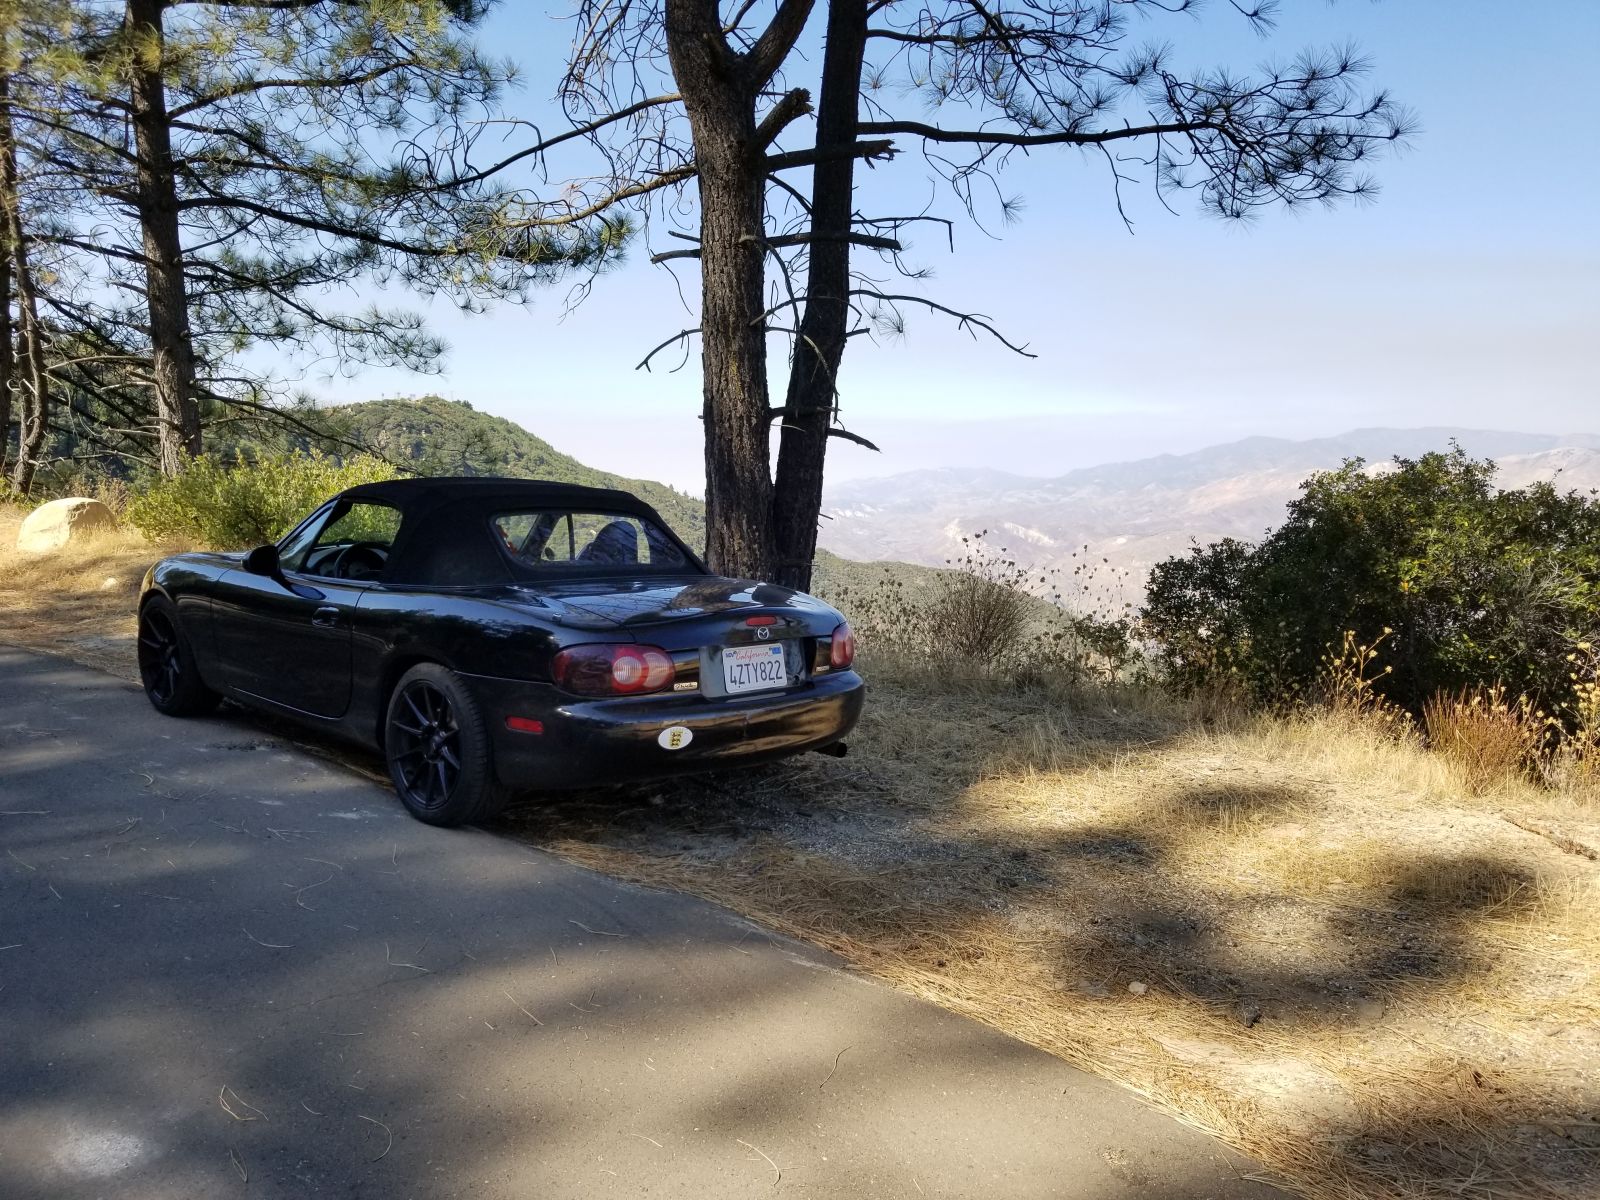 For all the flak they get, the Miata is a great car. Easily the best bang for your buck for a sports car and I think they are quite handsome cars as well.